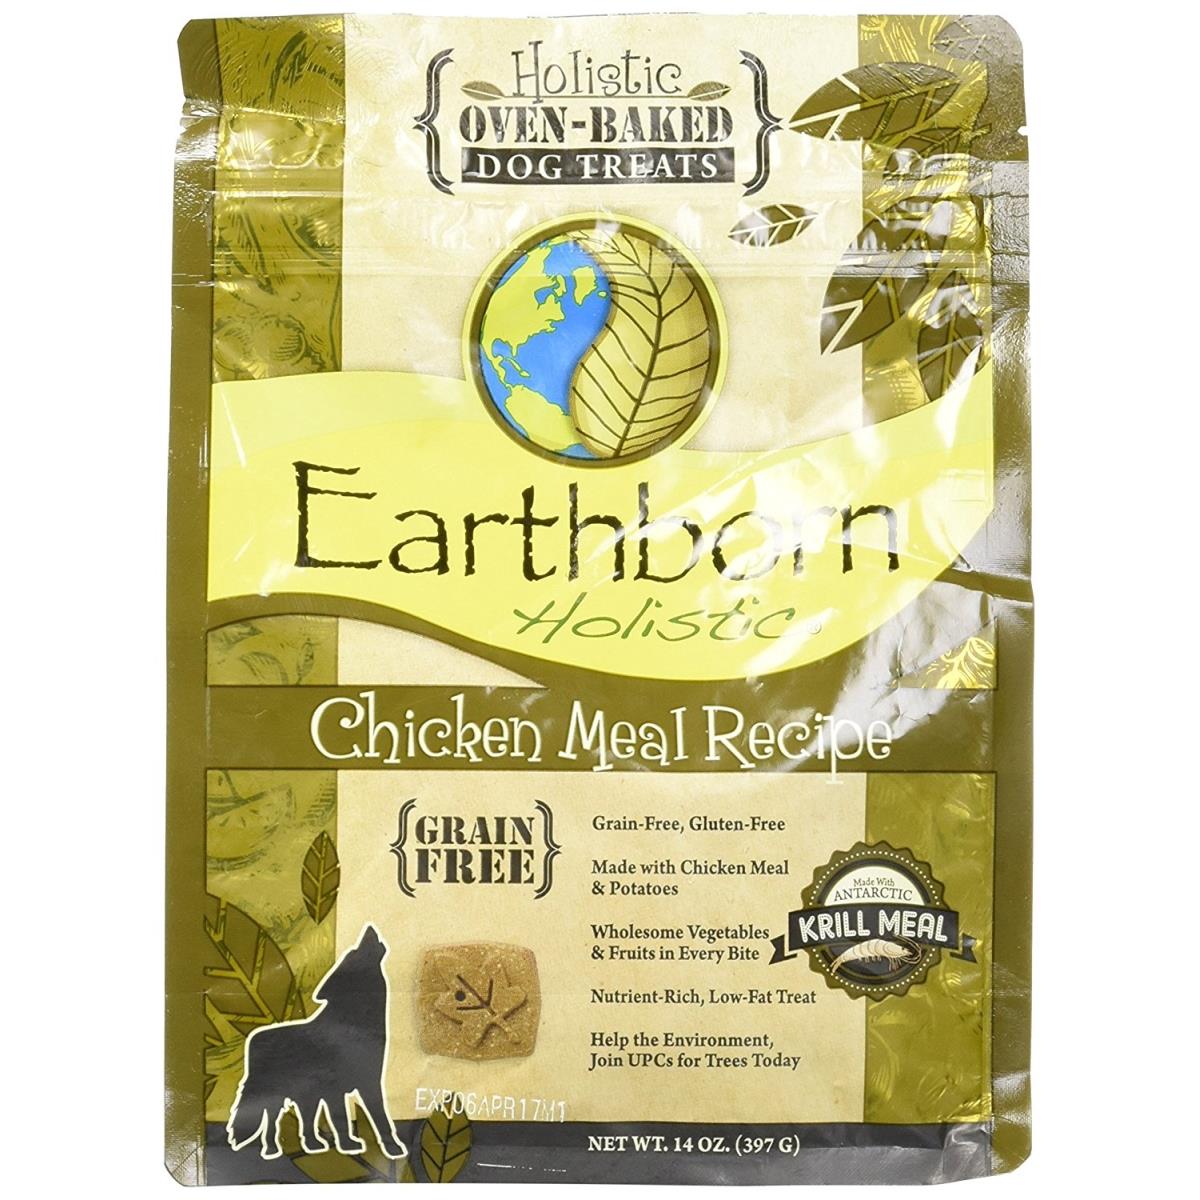 054890 14 Oz Holistic Chicken Meal Recipe Holistic Oven-baked Dog Treats